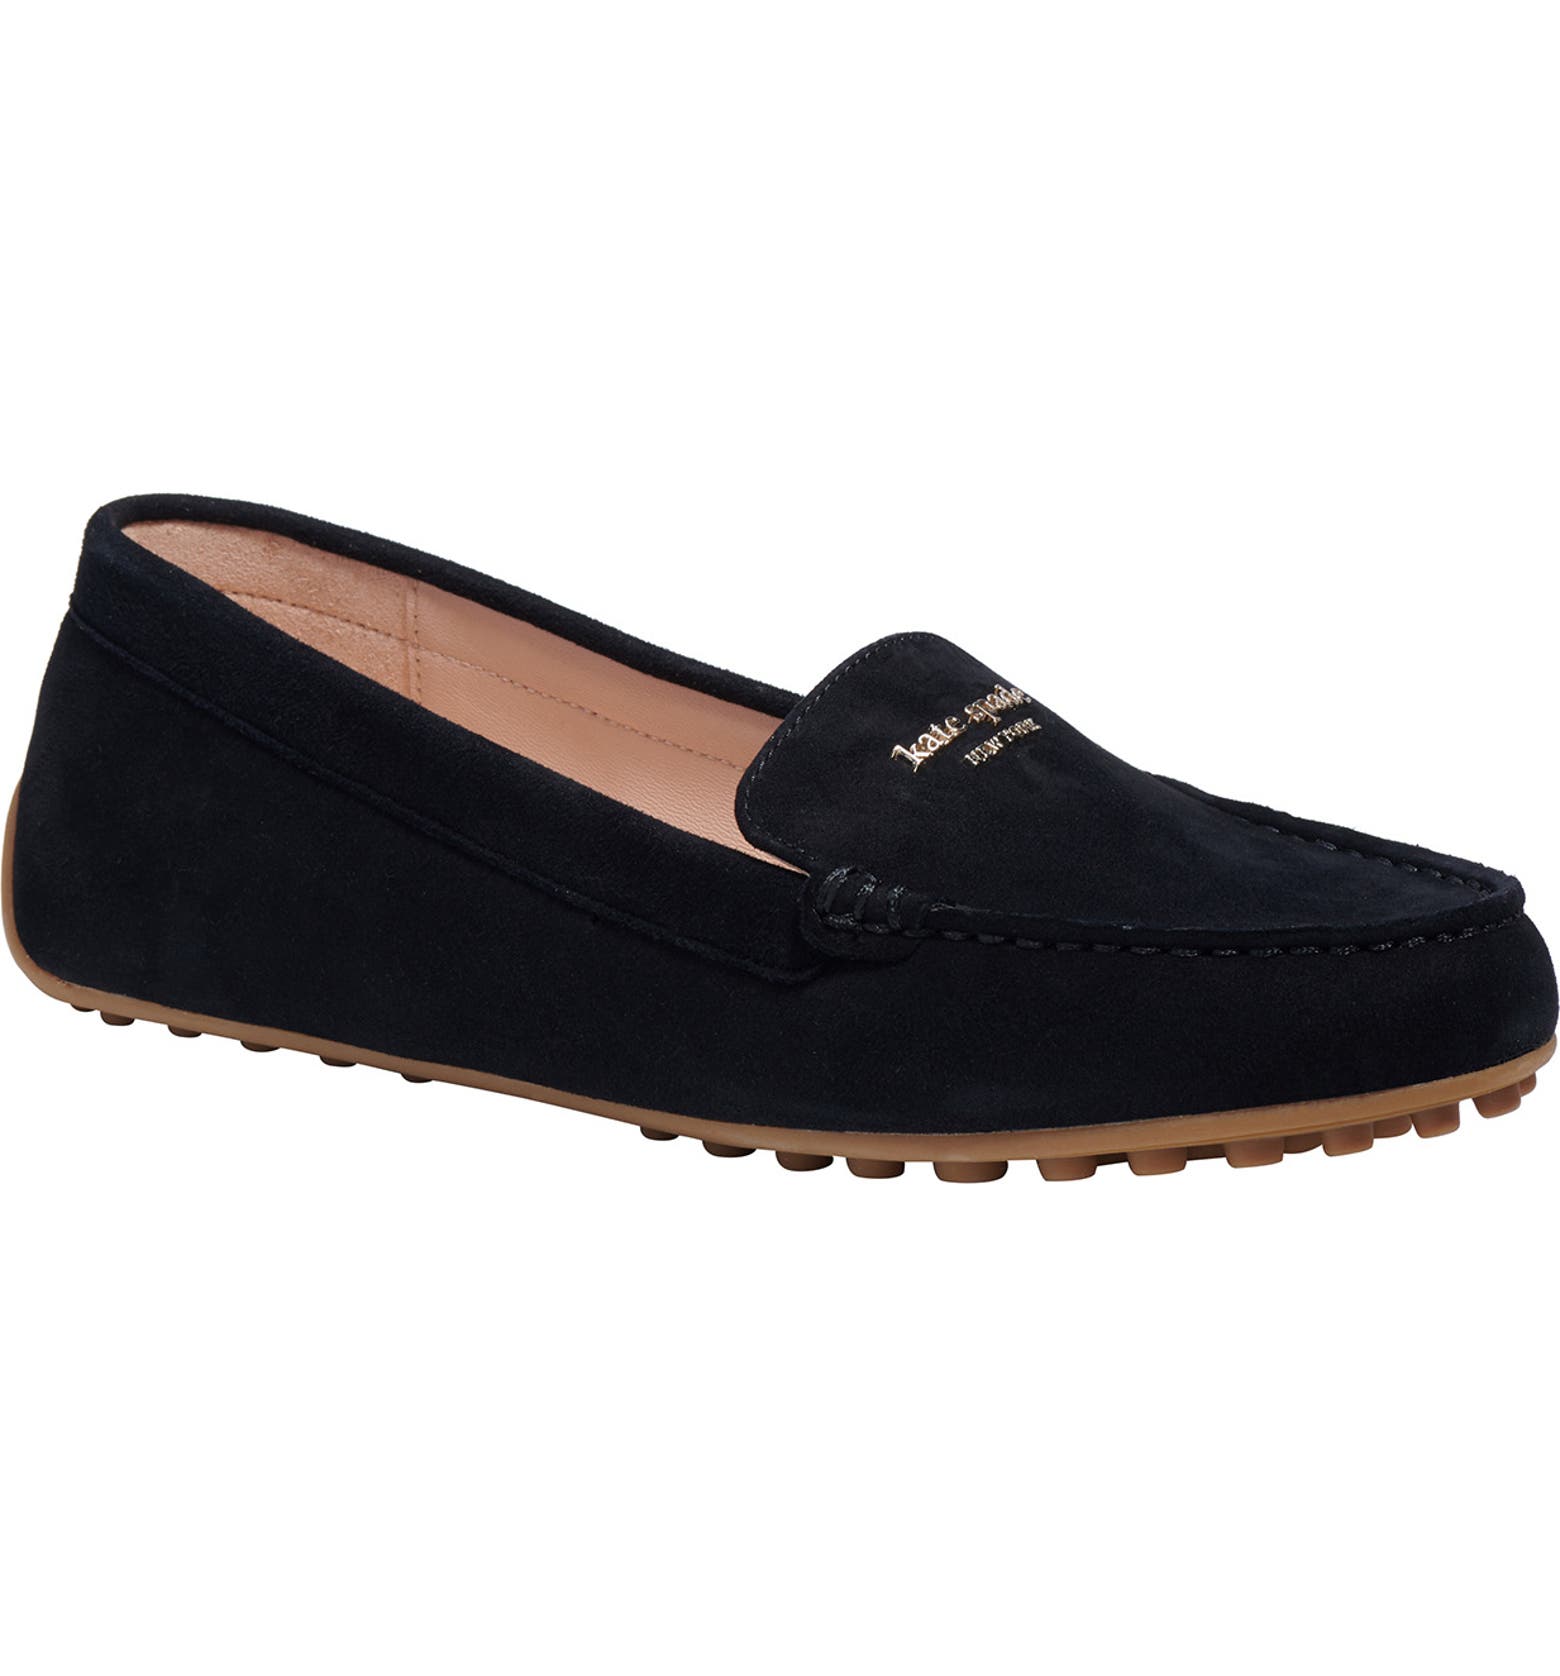 The Different Types Of Loafers: Black driving loafers